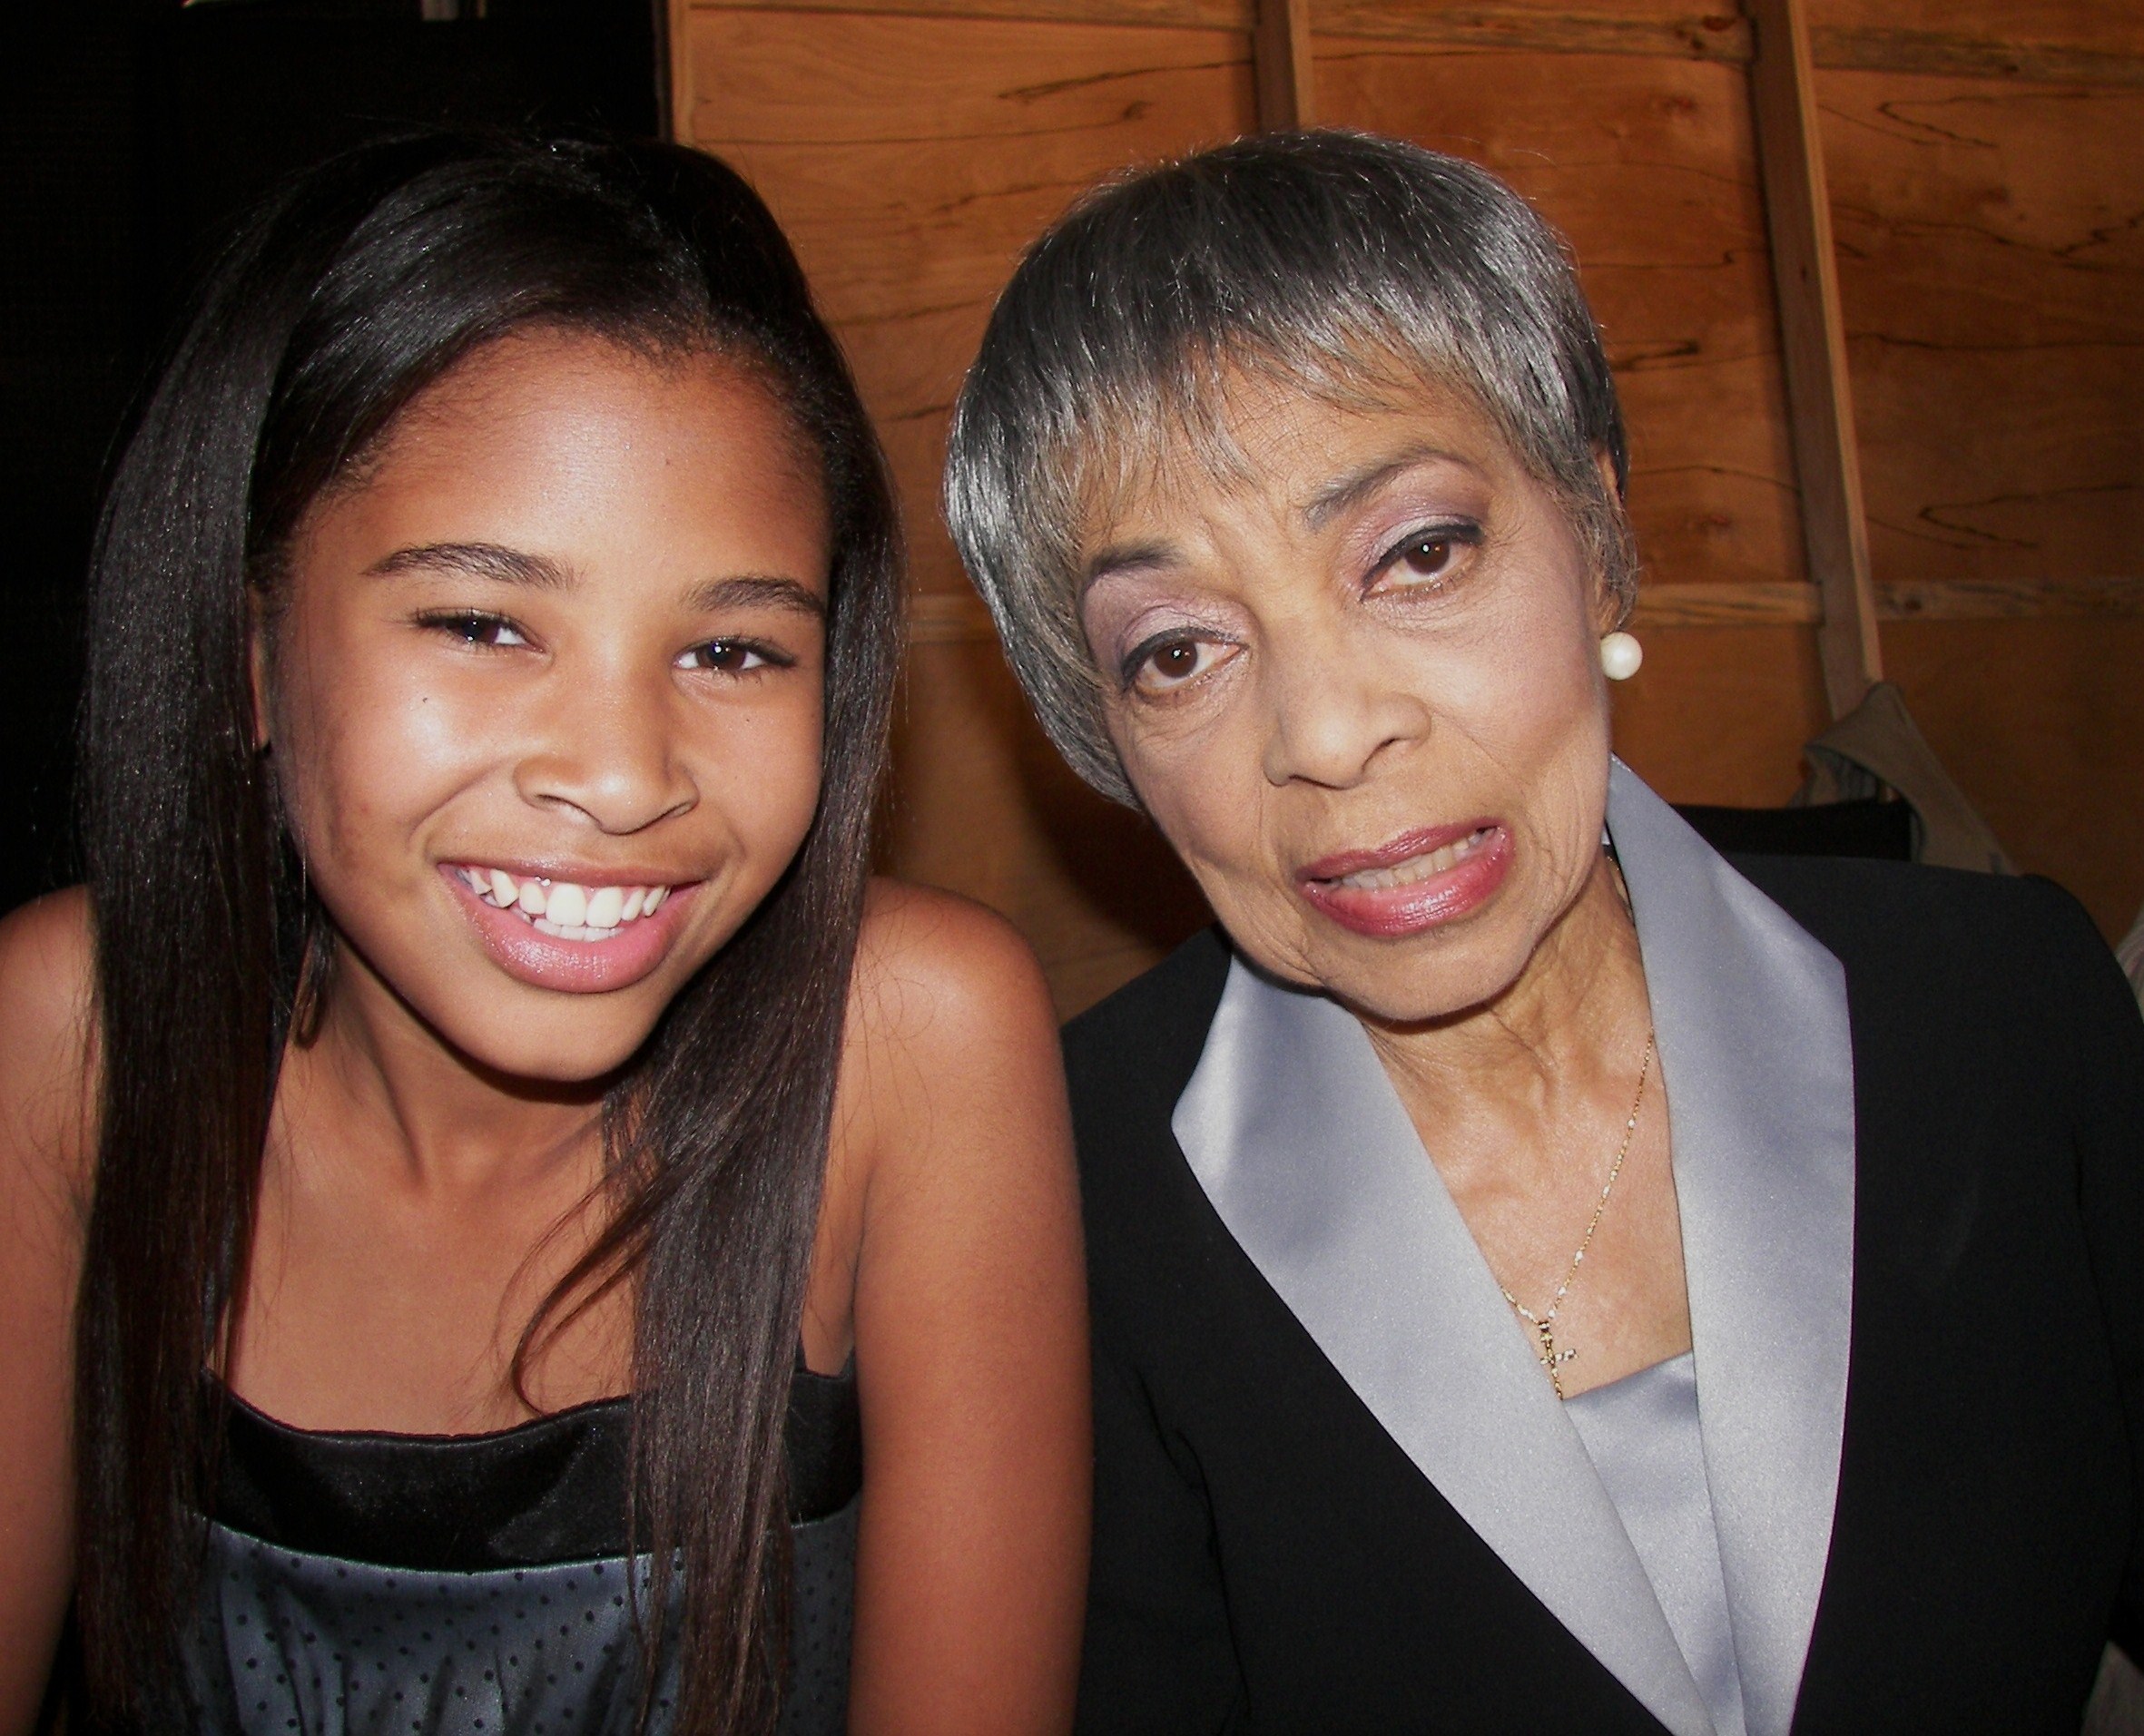 Taylor Faye and the trailblazing legendary Mrs. Ruby Dee on the set of Video Girl 2009